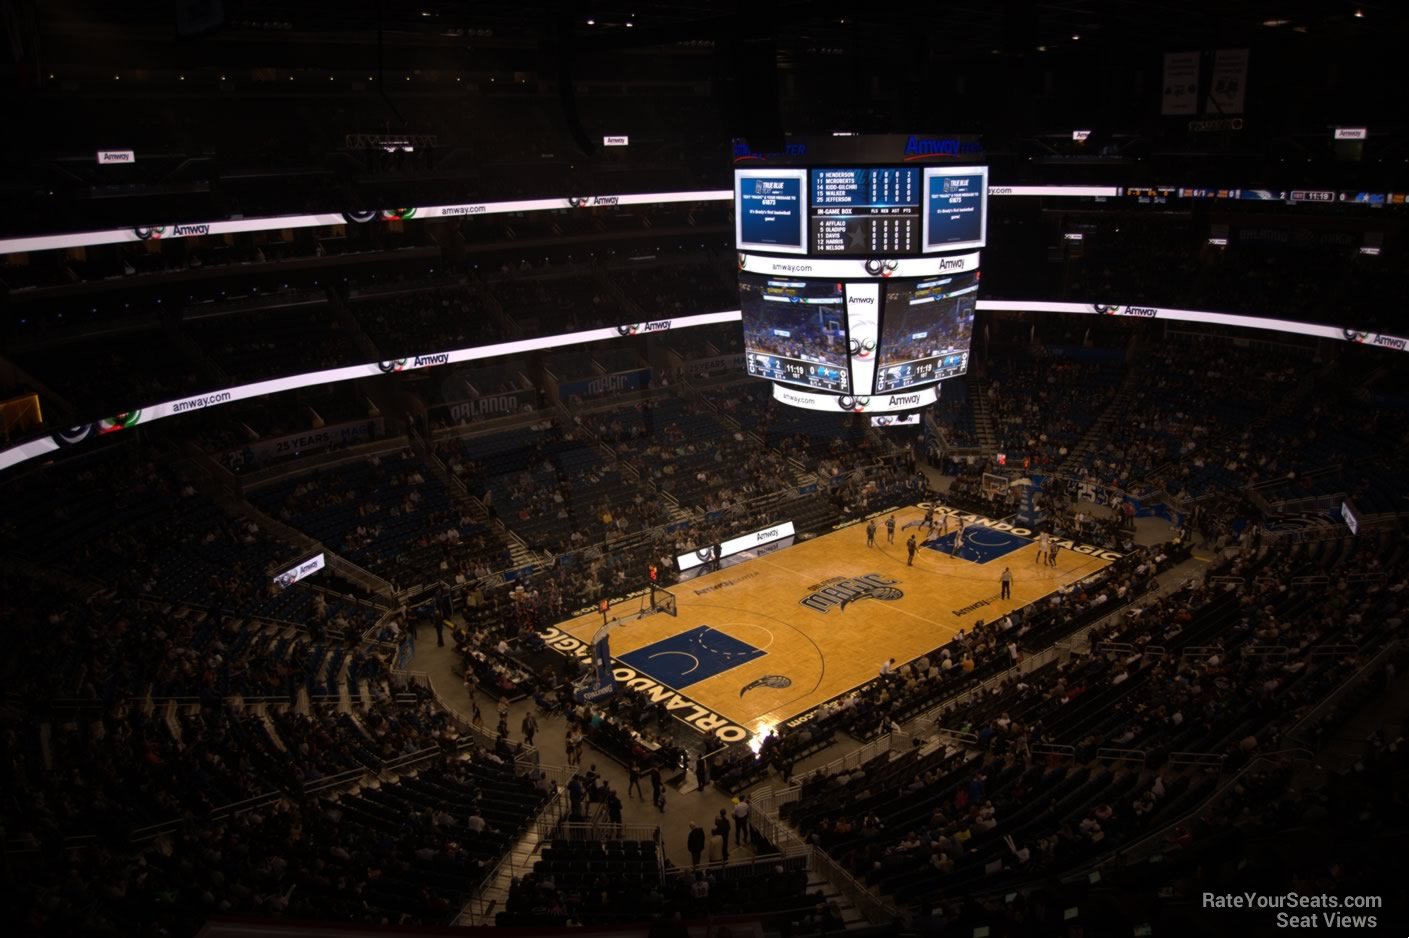 section 229 seat view  for basketball - amway center